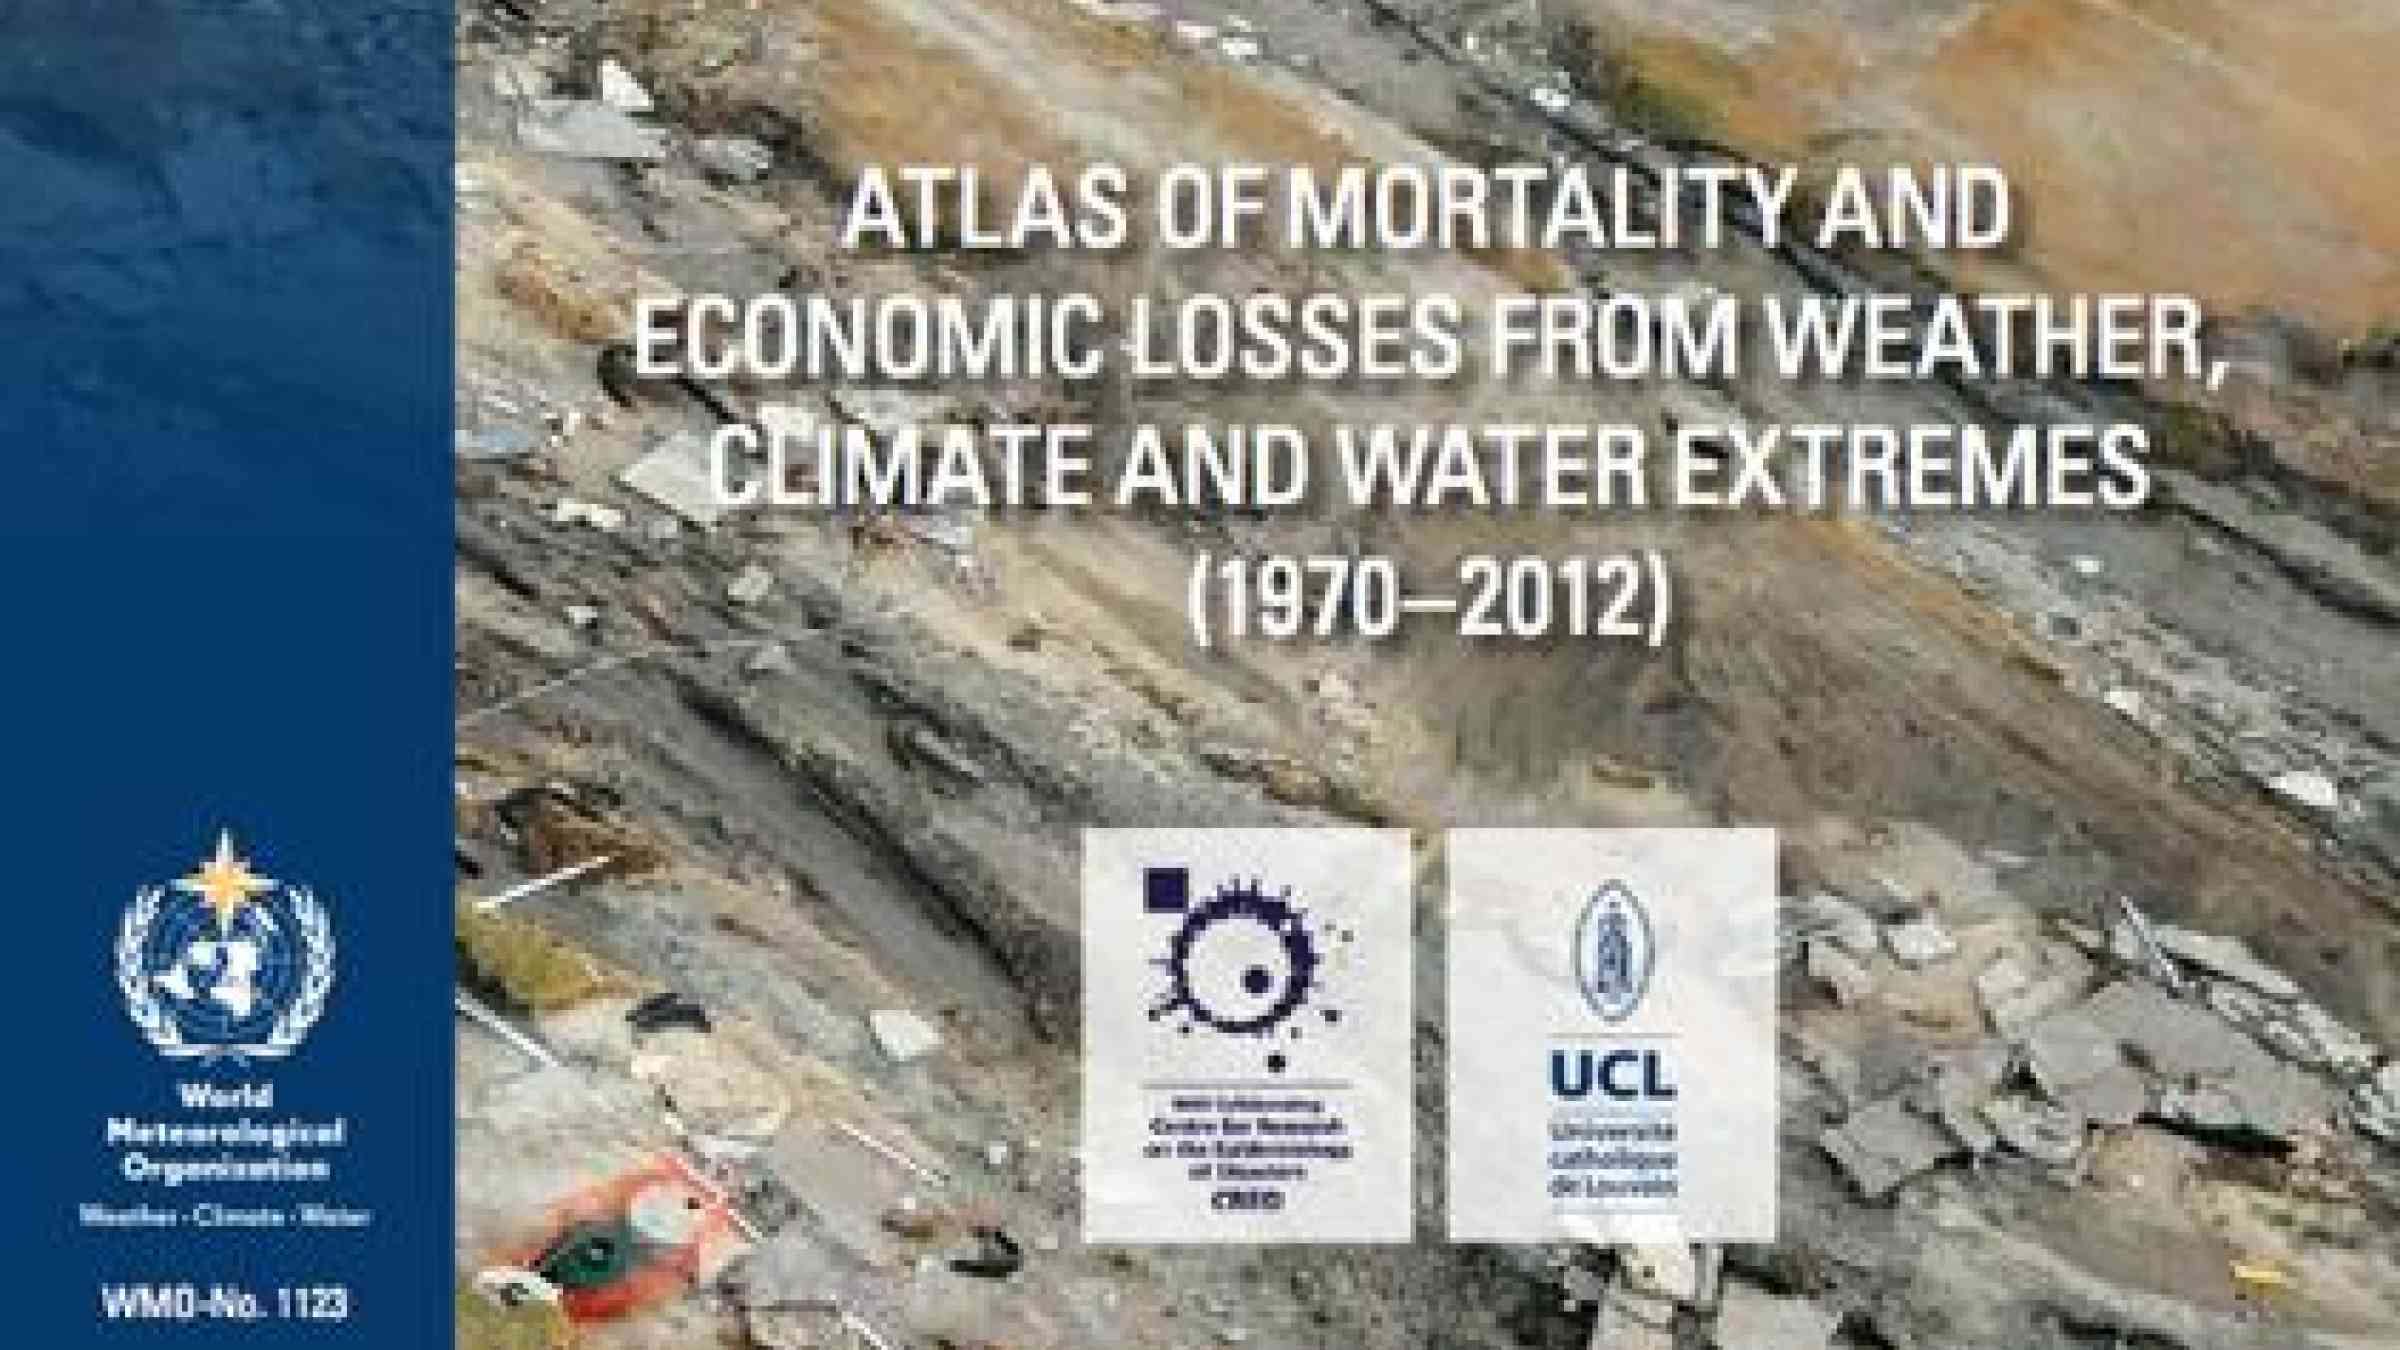 The Atlas of Mortality and Economic Losses from Weather, Climate and Water Extremes (1970-2012) is published today. (Photo: WMO and CRED)